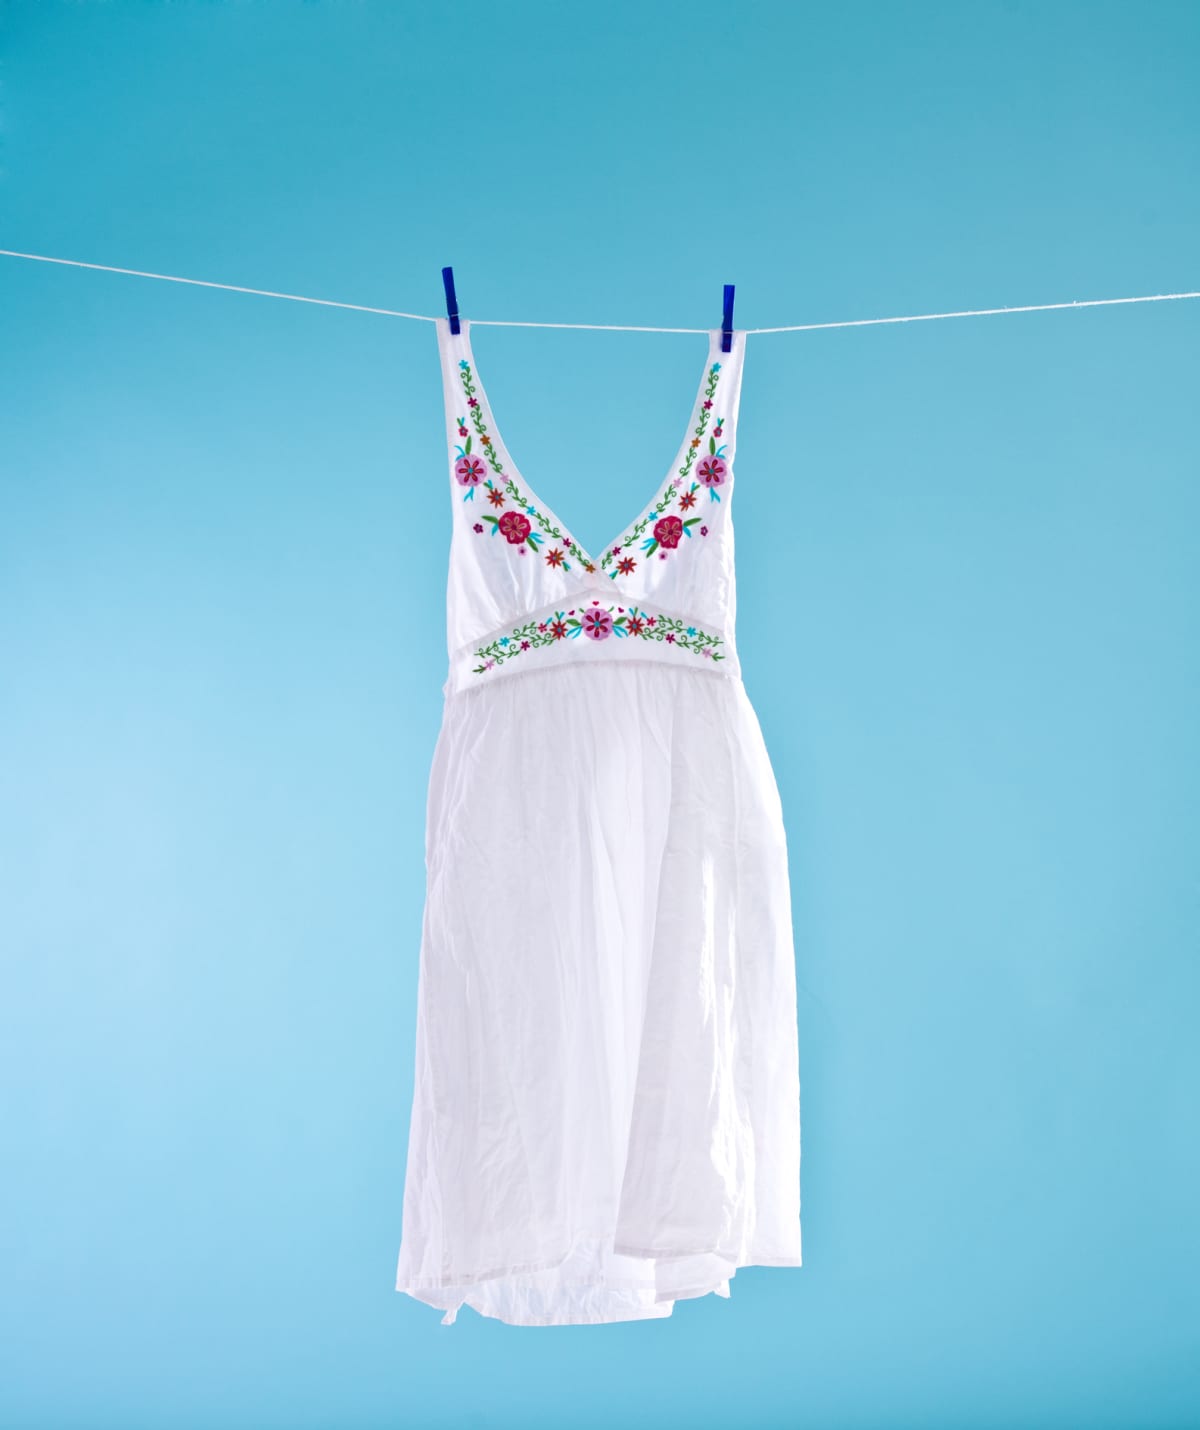 White dress hanging out on a clothesline to dry. Blue background. Summer time.